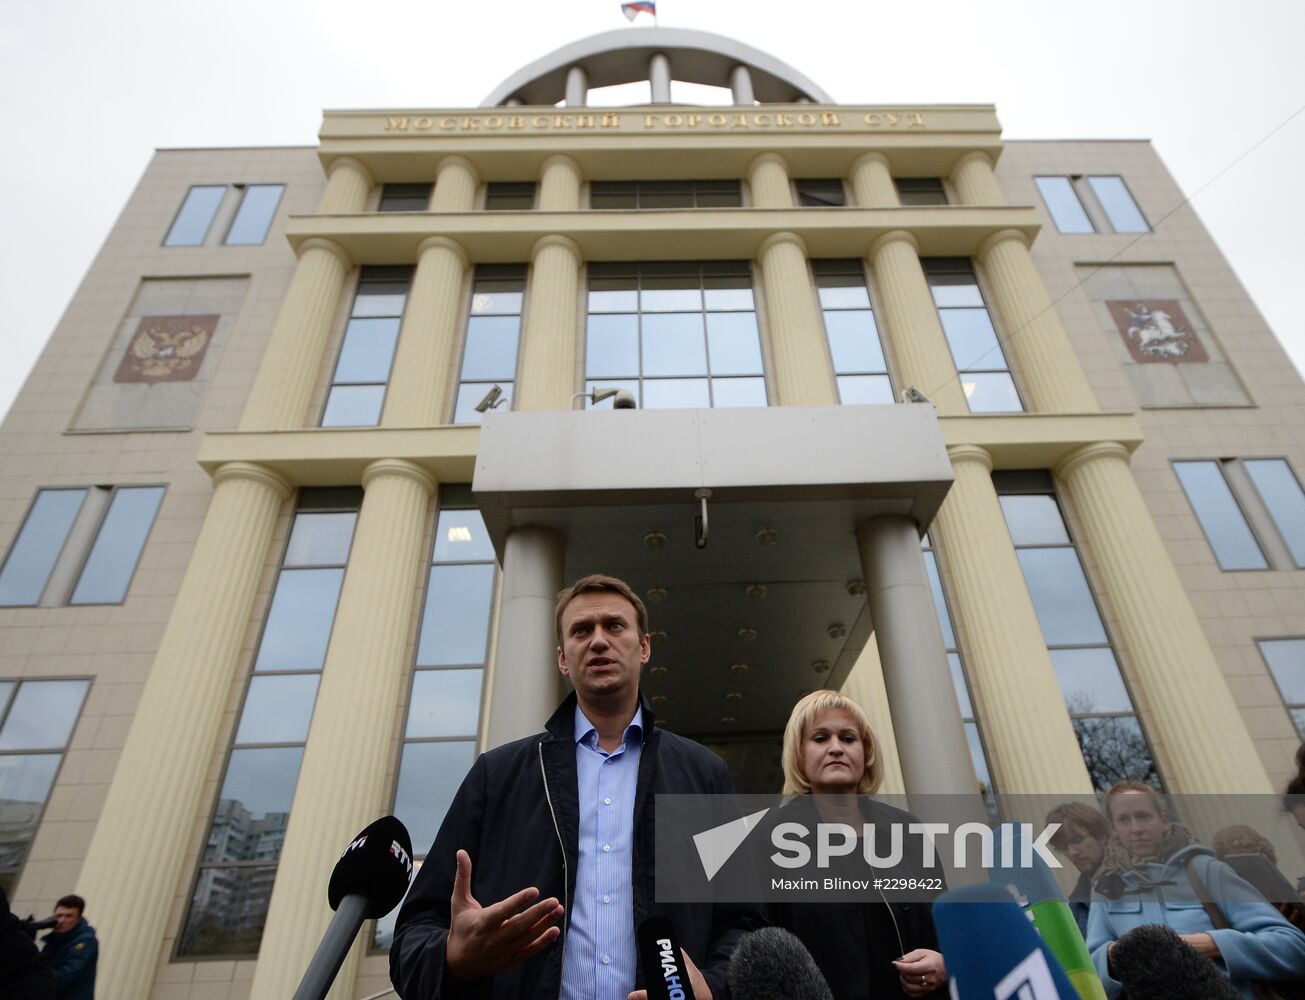 Hearing of case against Navalny brothers